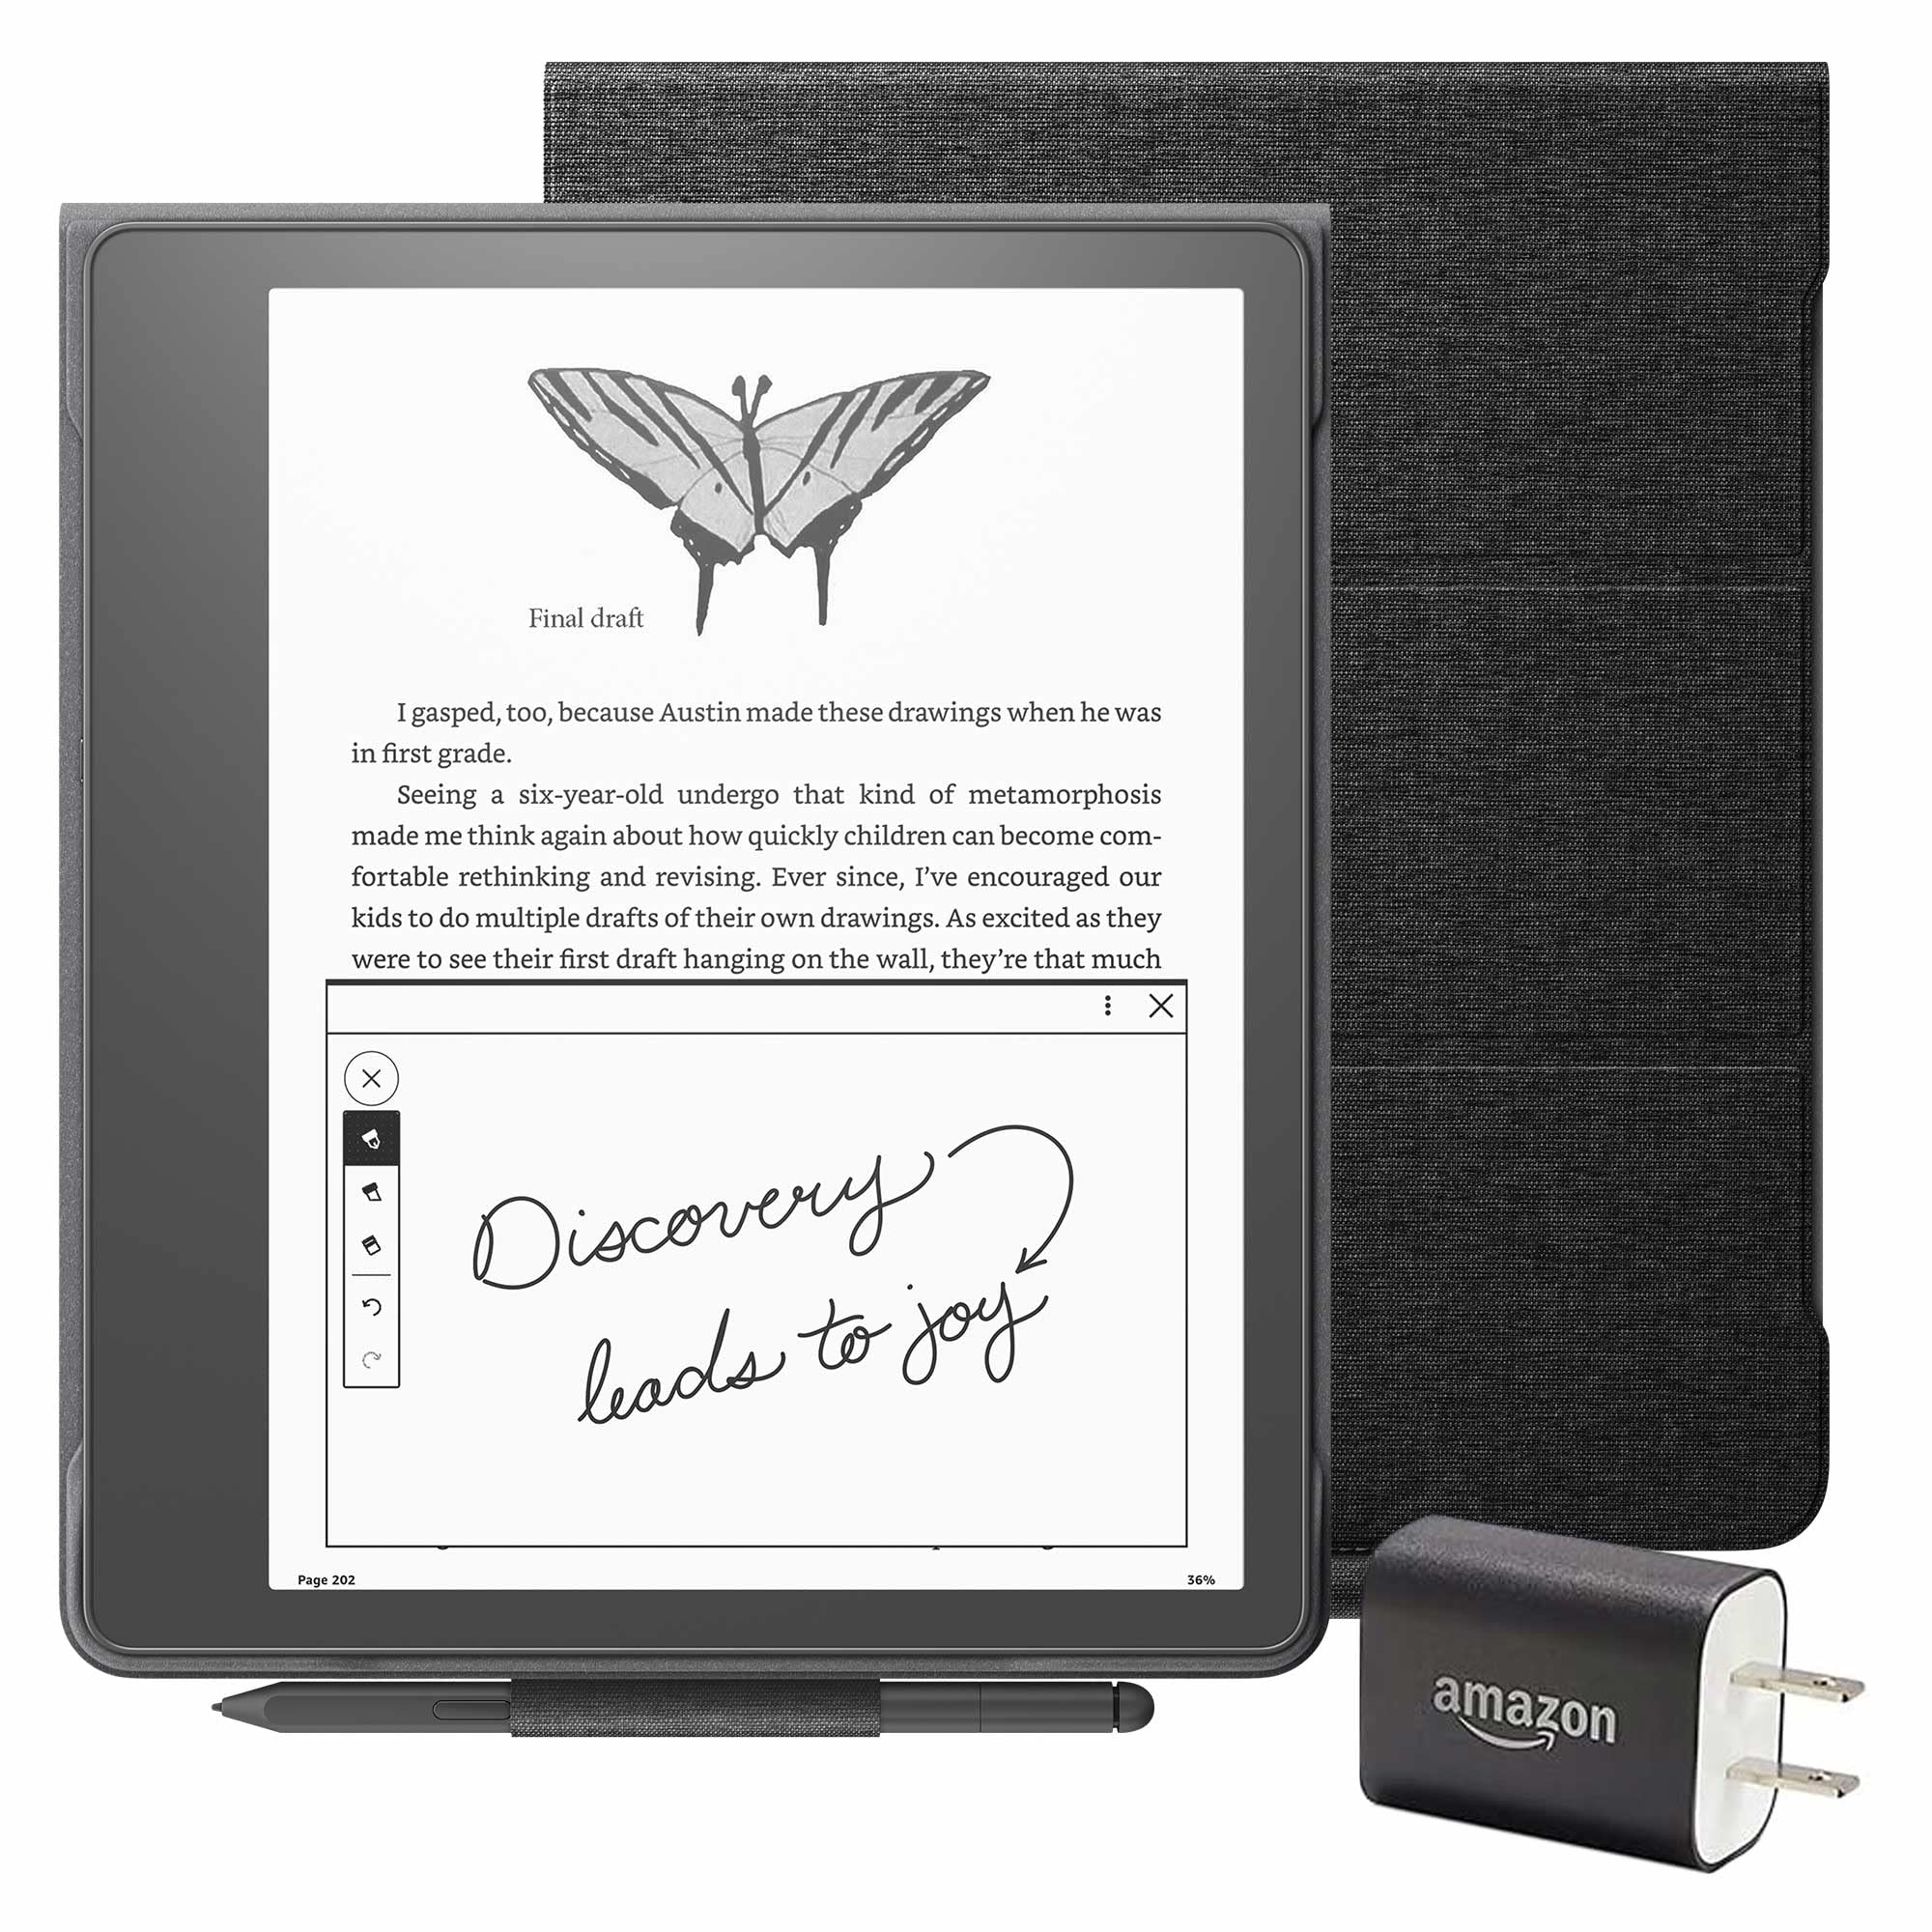 Kindle Scribe Essentials Bundle including Kindle Scribe (64 GB), Premium Pen, Fabric Folio Cover with Magnetic Attach - Black, and Power Adapter